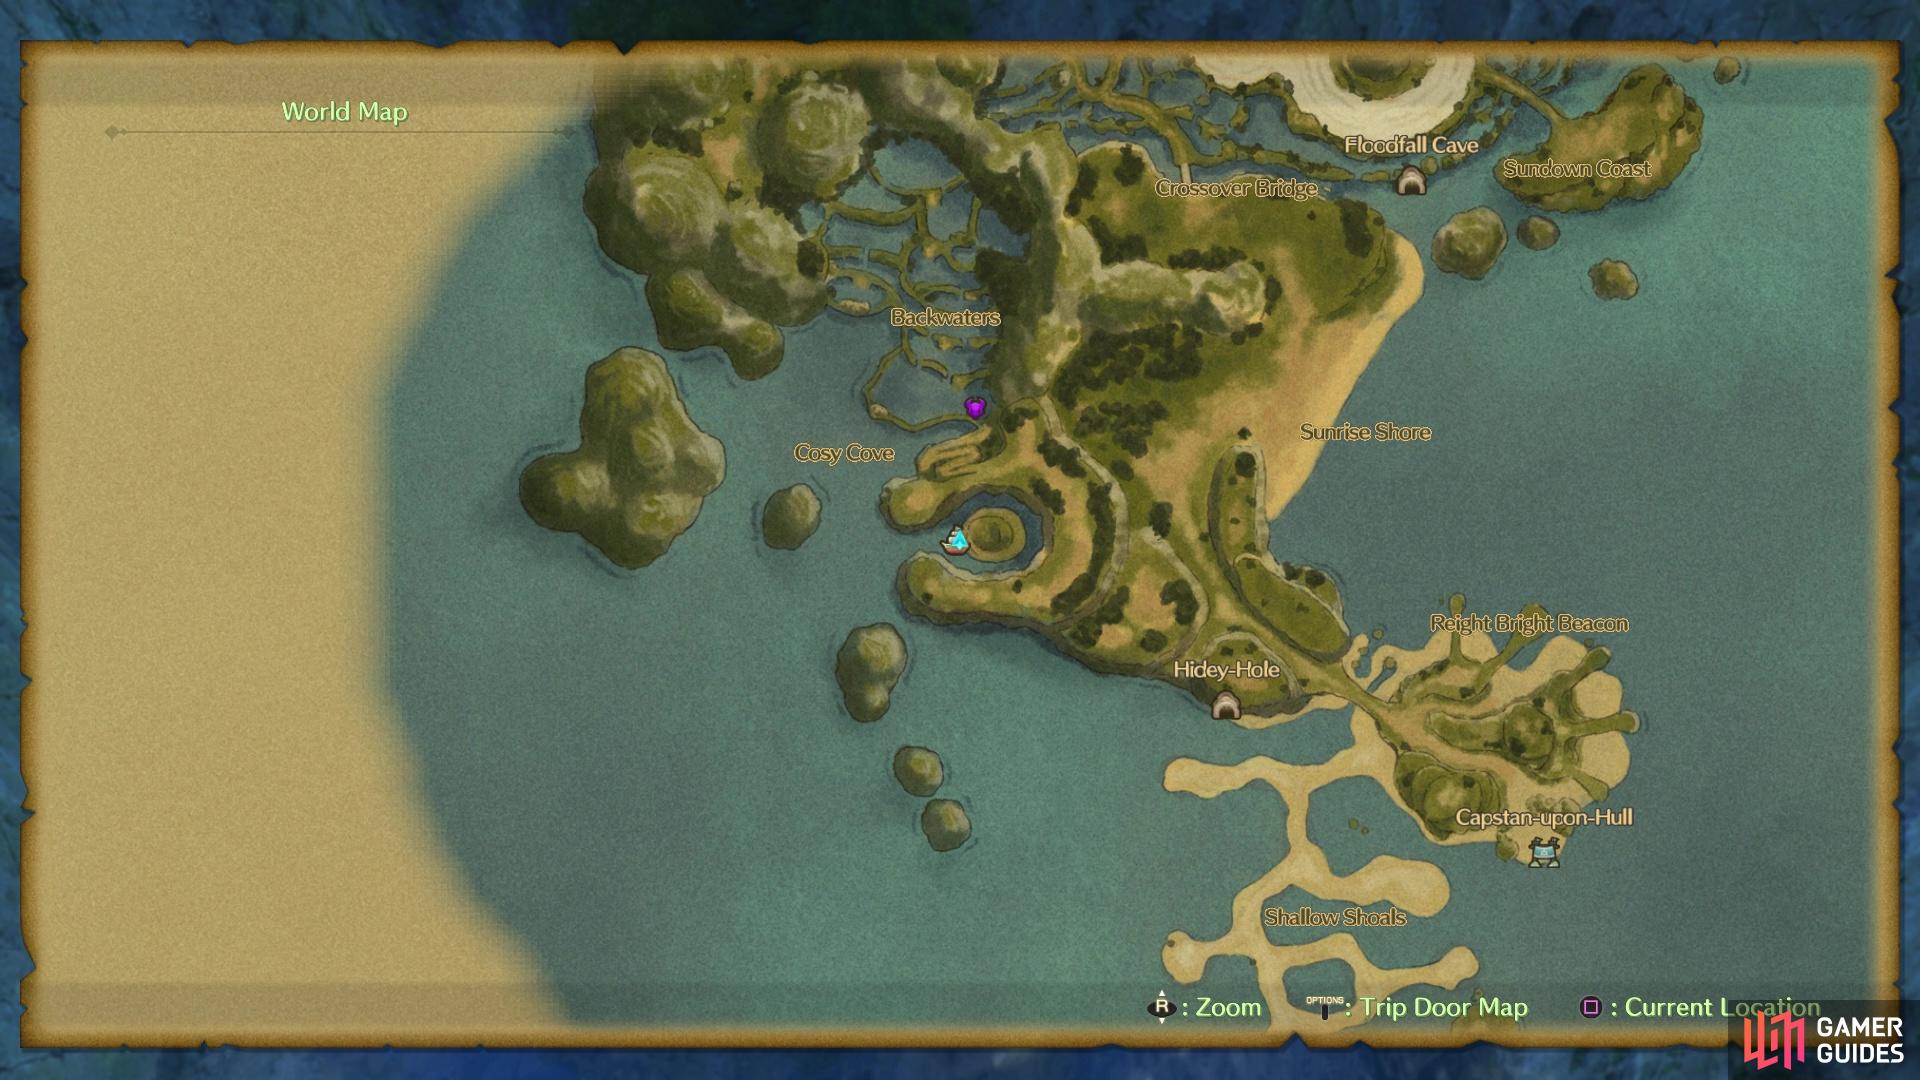 The location of Tidewash Cave on the world map